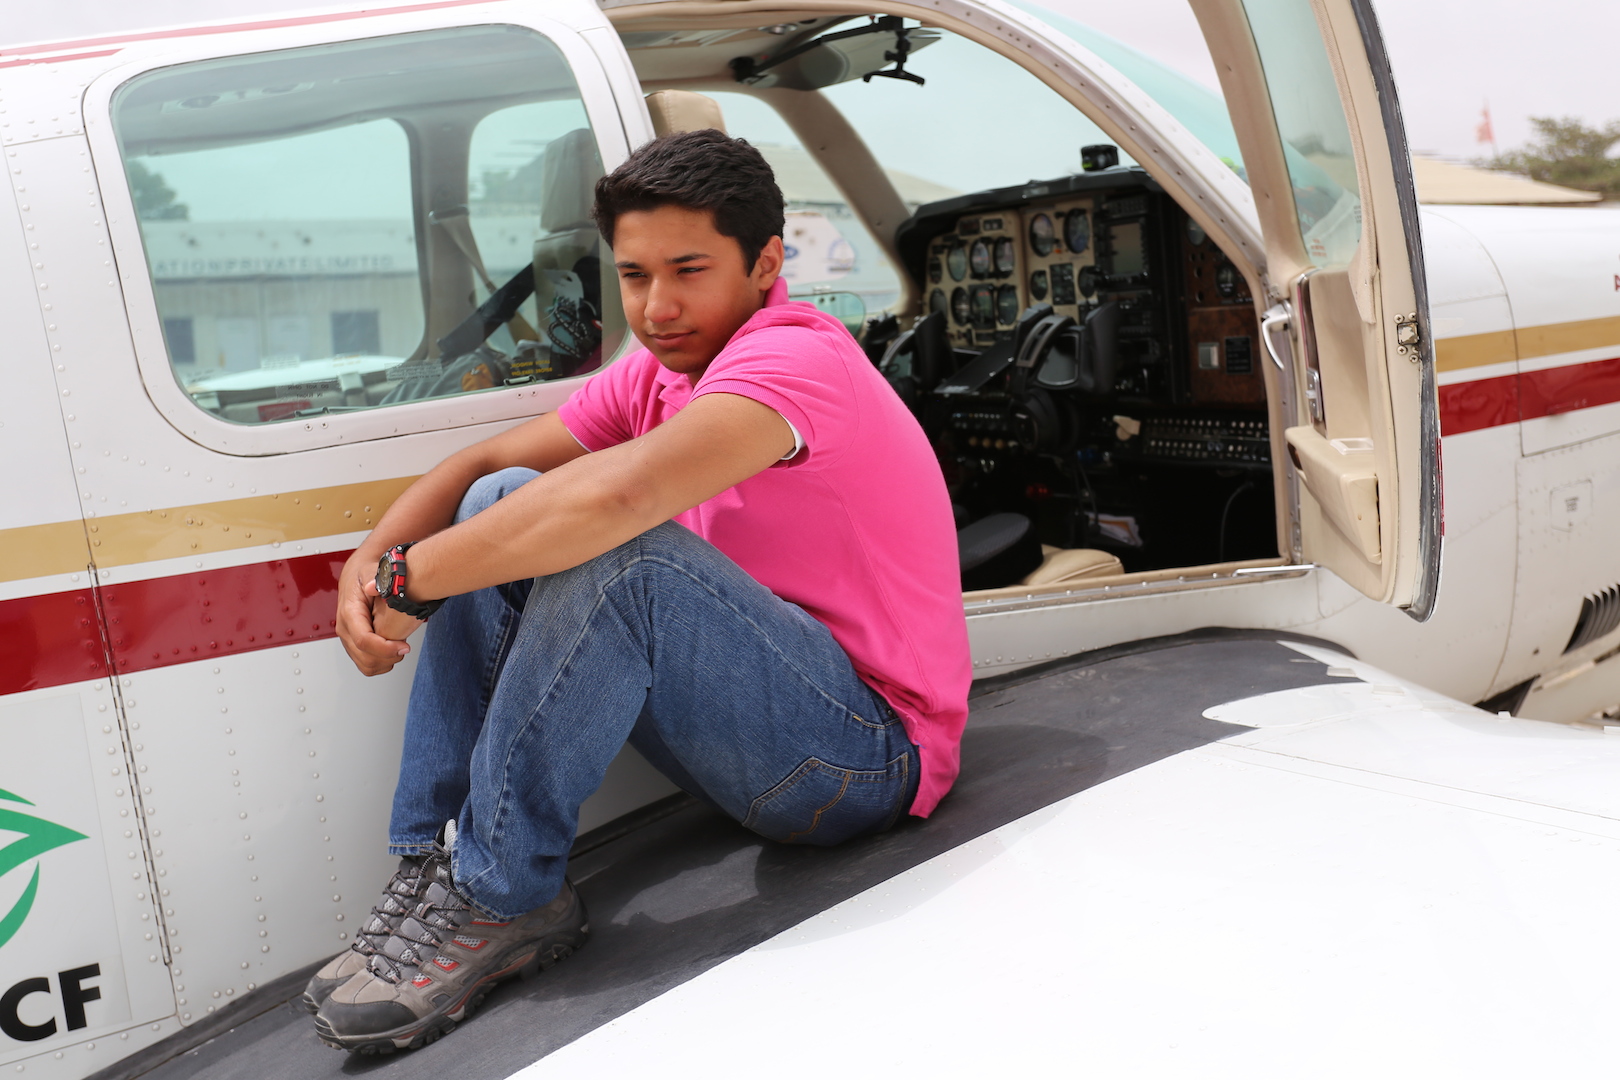 Haris takes a rest during his flight around the world